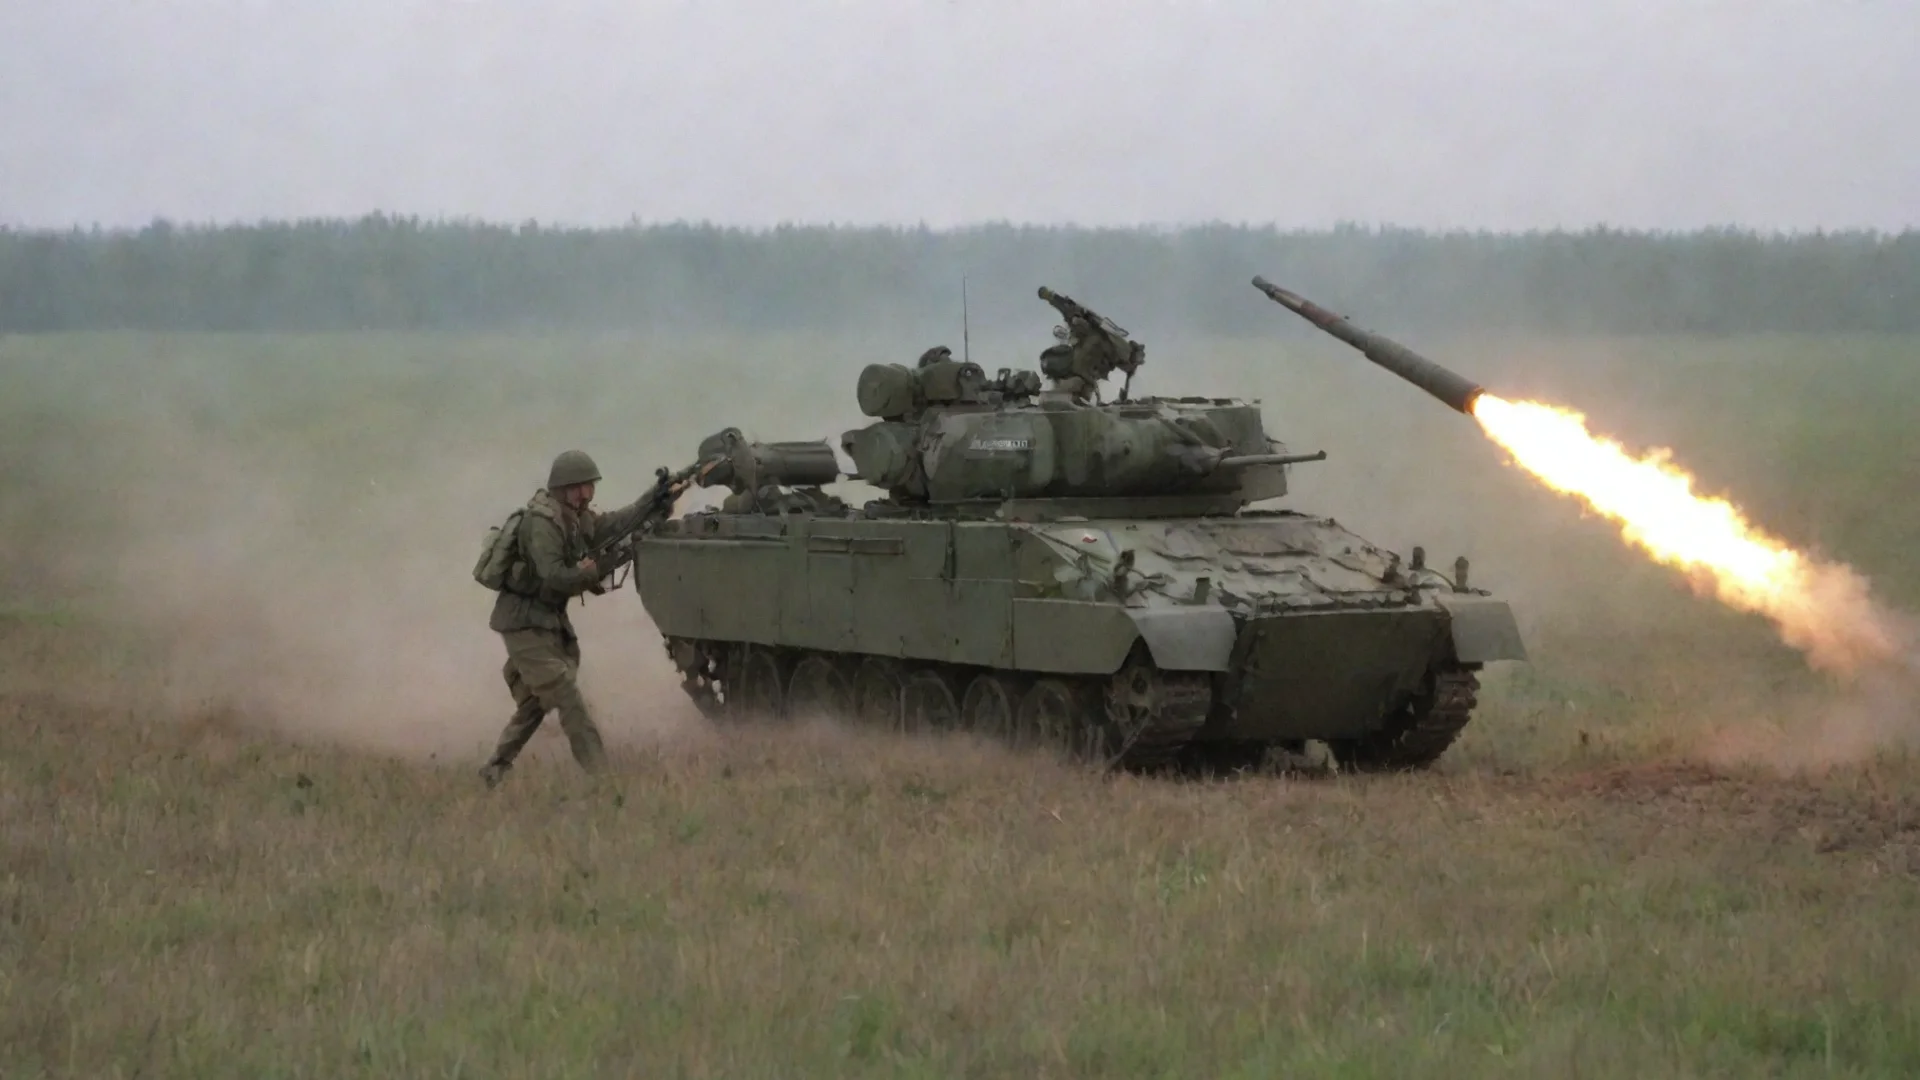 aibritish soldier firing an nlaw type rocket launcher at a t 72 type russian tank in the field wide